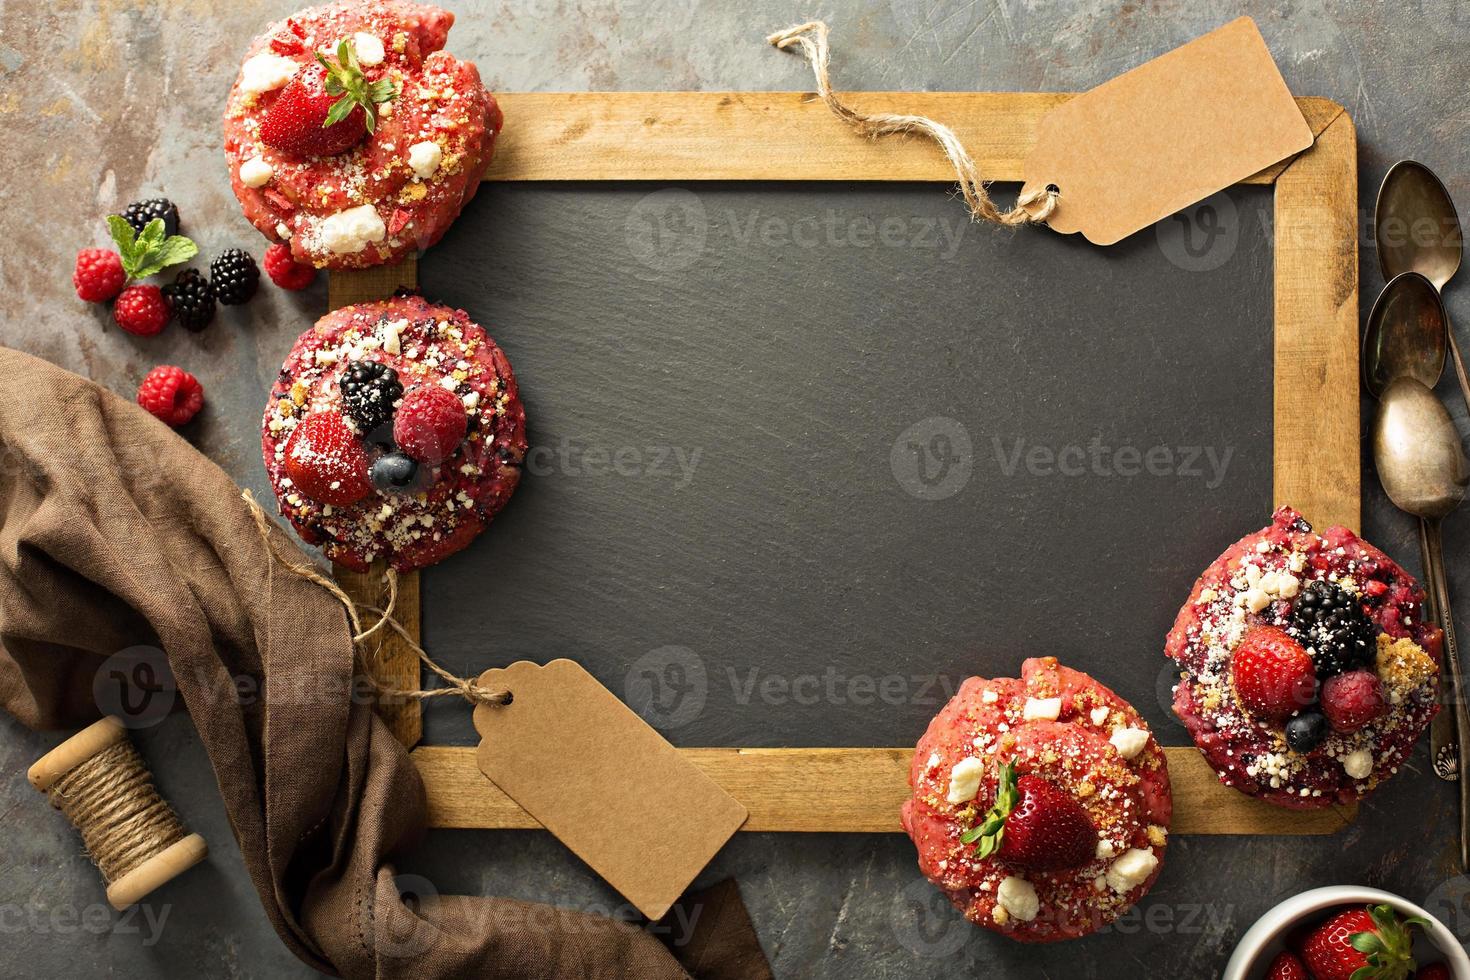 Variety of donuts around a chalkboard photo